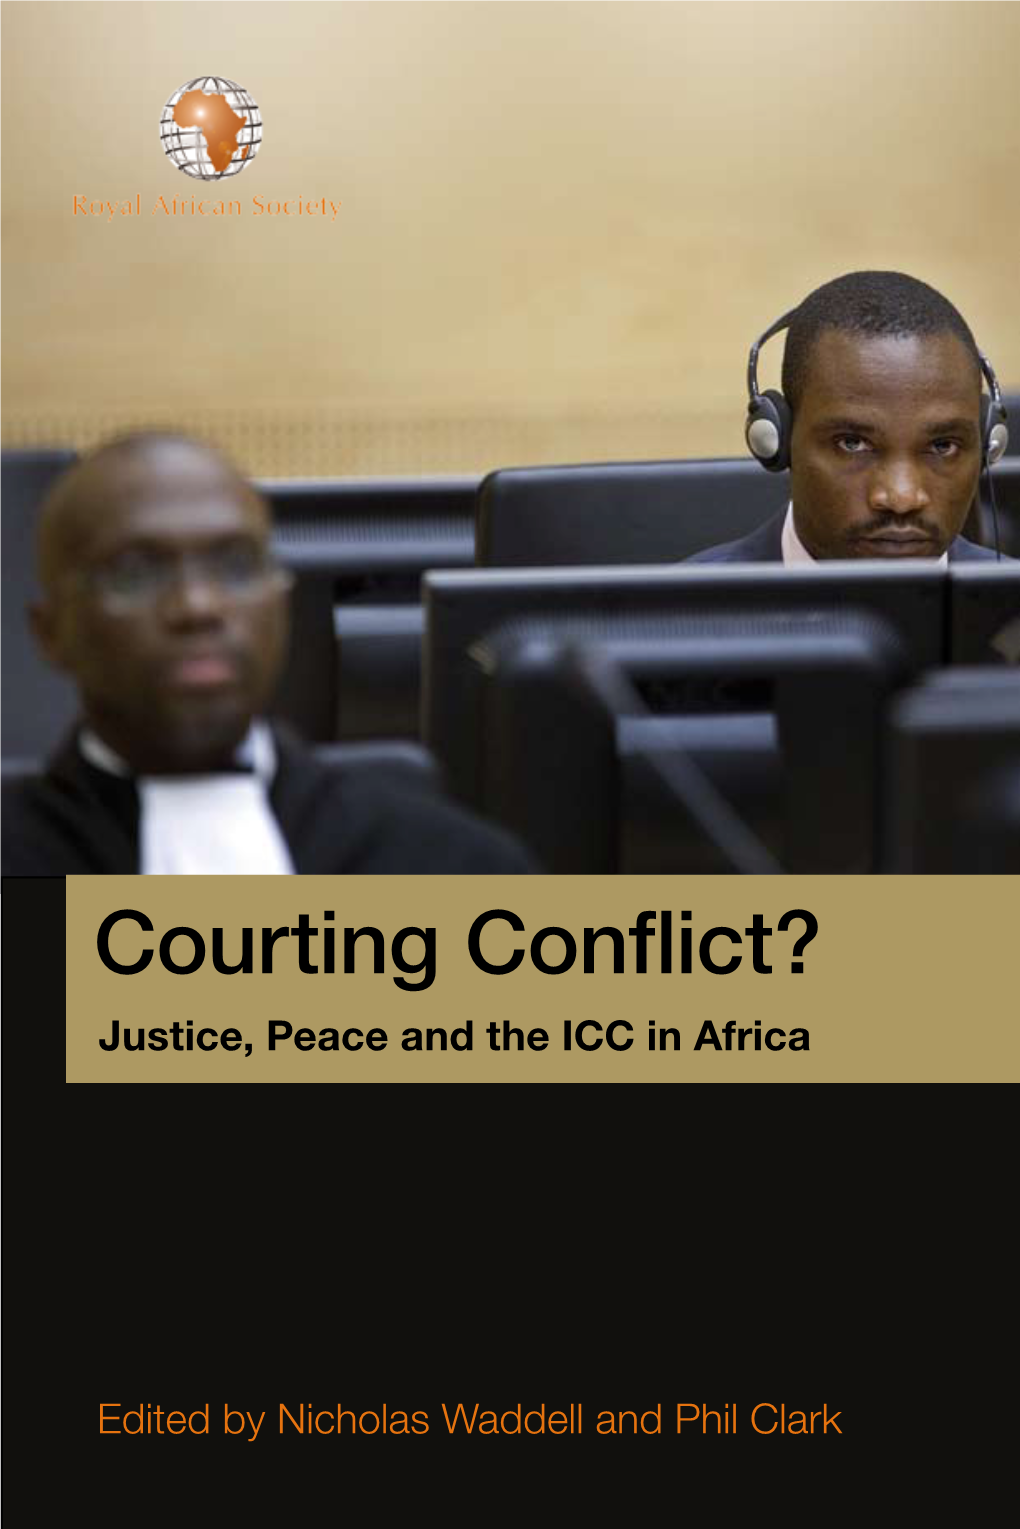 Justice, Peace and the ICC in Africa